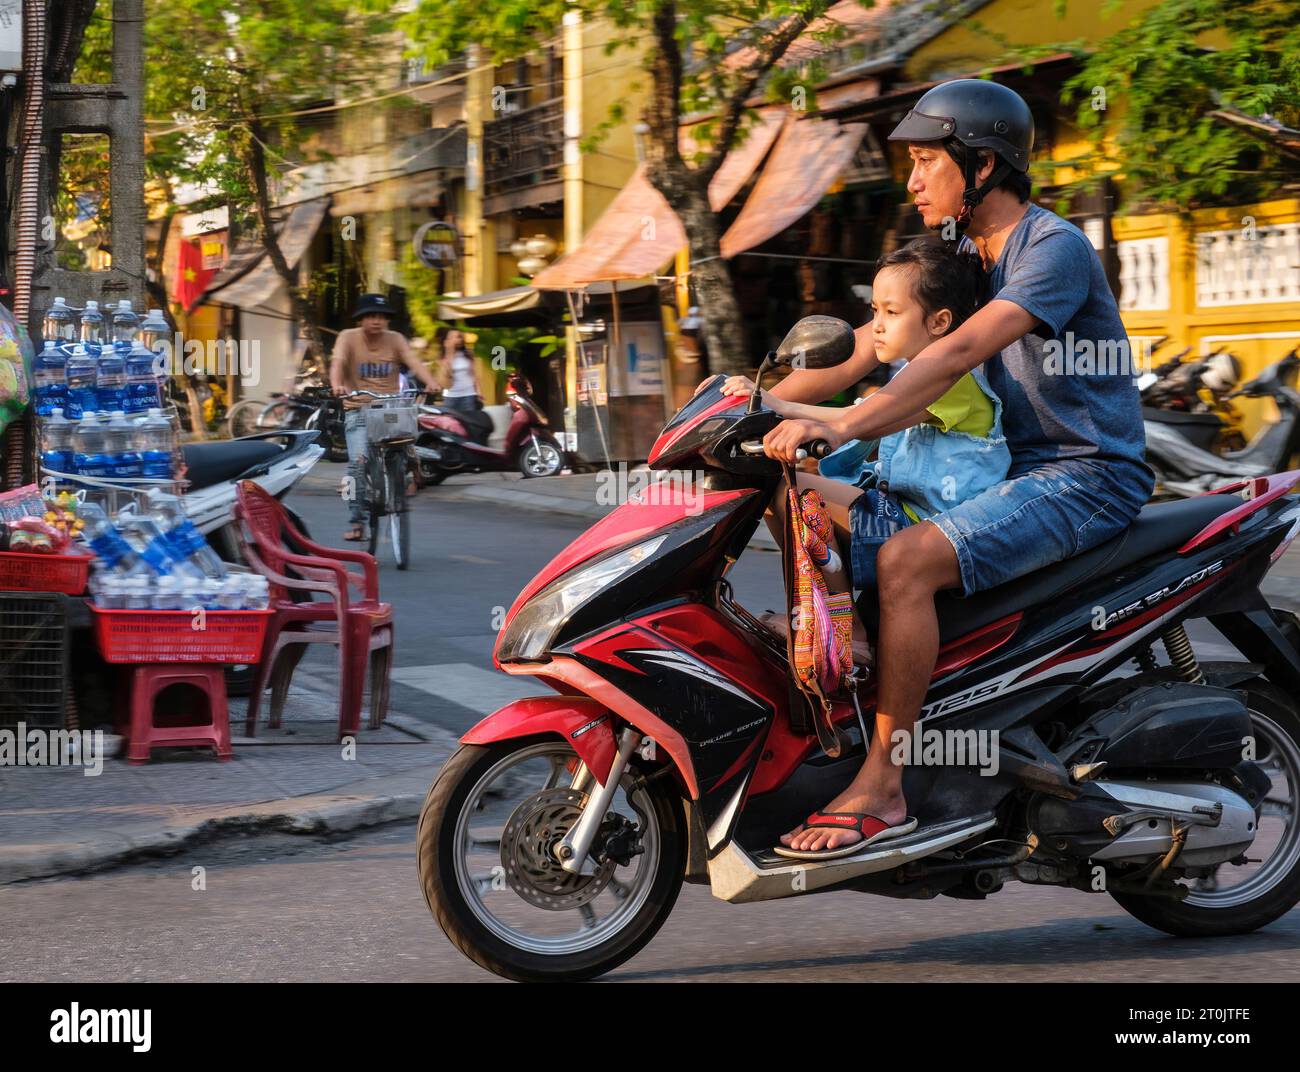 Hoi An, Vietnam. Father and Daughter on Motorbike. Stock Photo